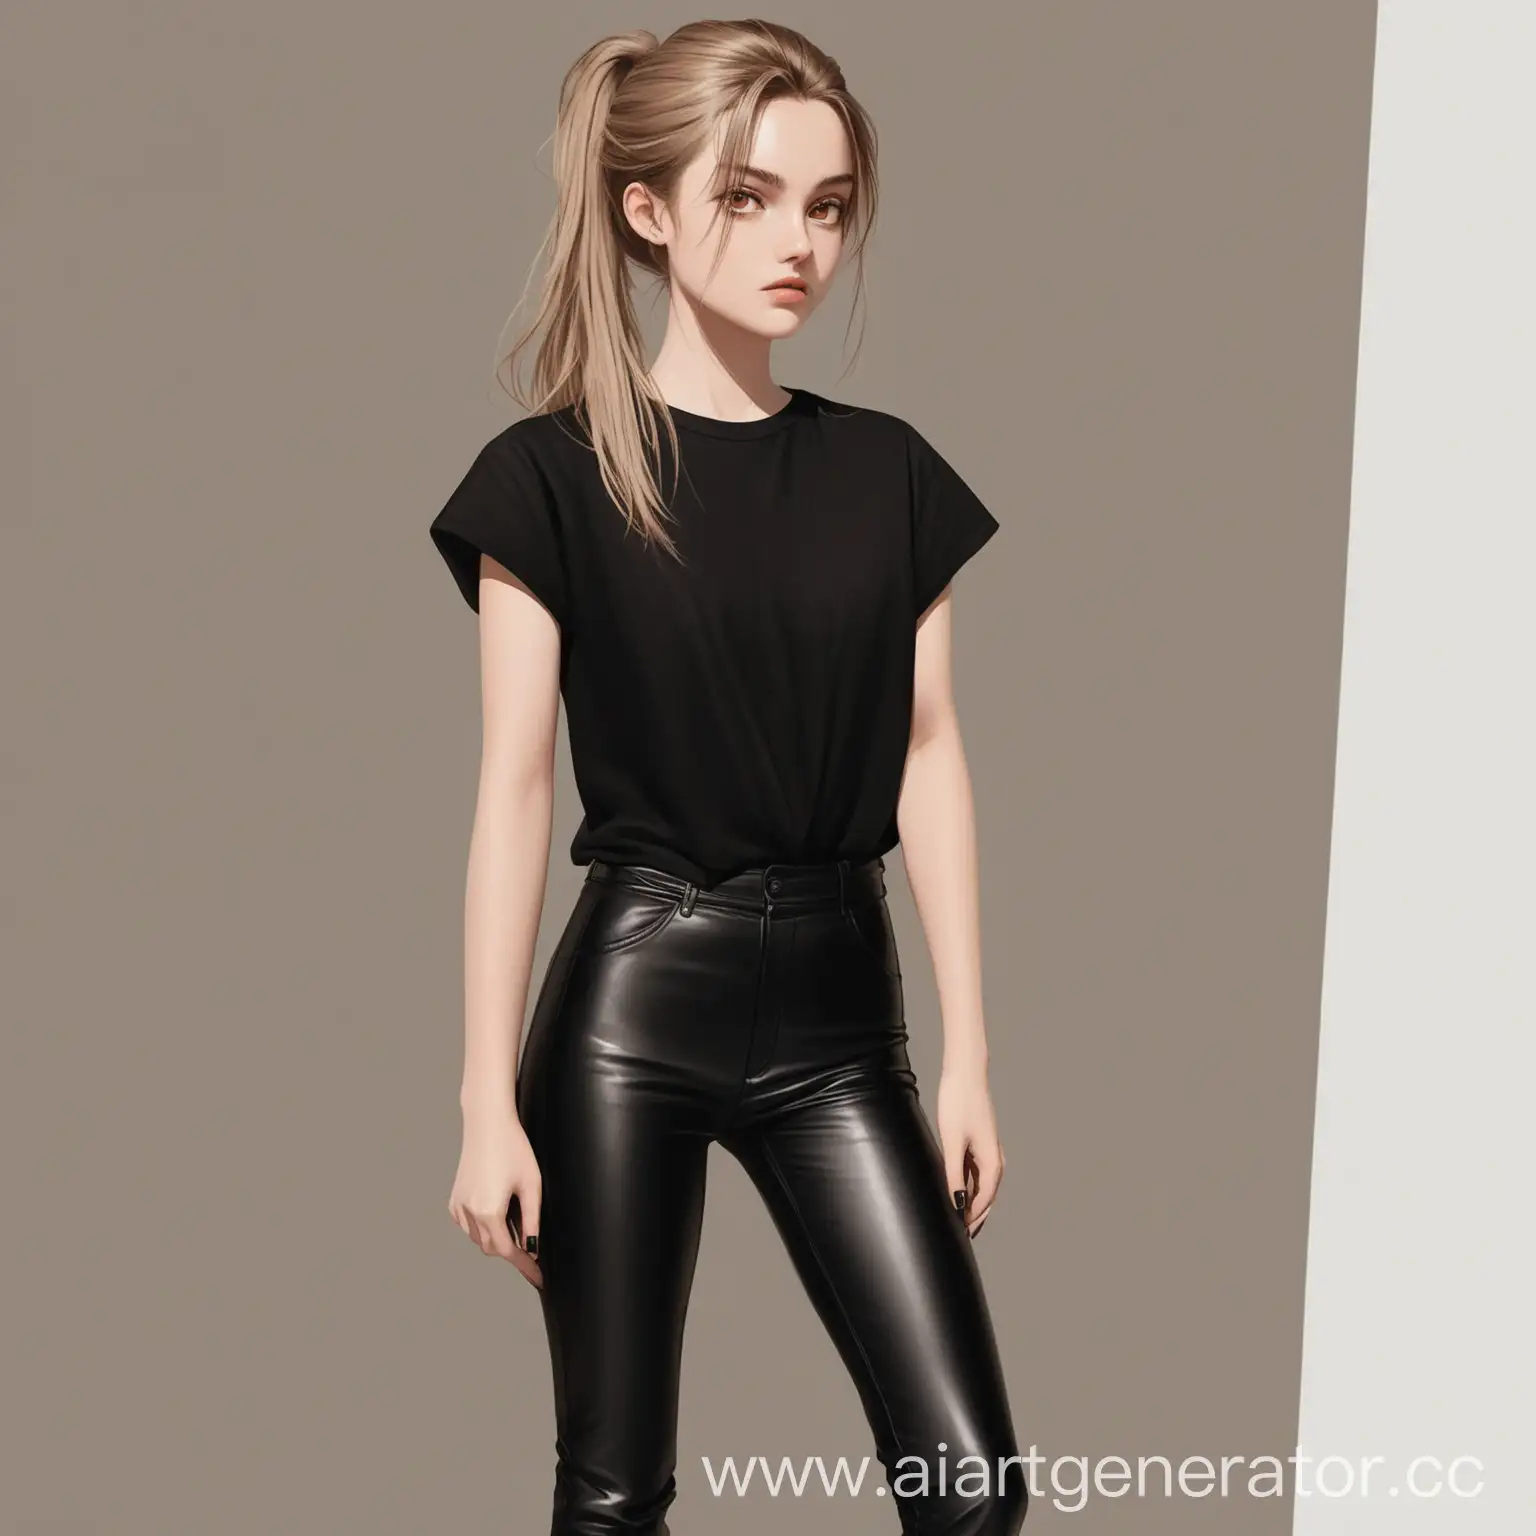 Stylish-BrownEyed-Girl-in-Black-Leather-Pants-and-Zara-TShirt